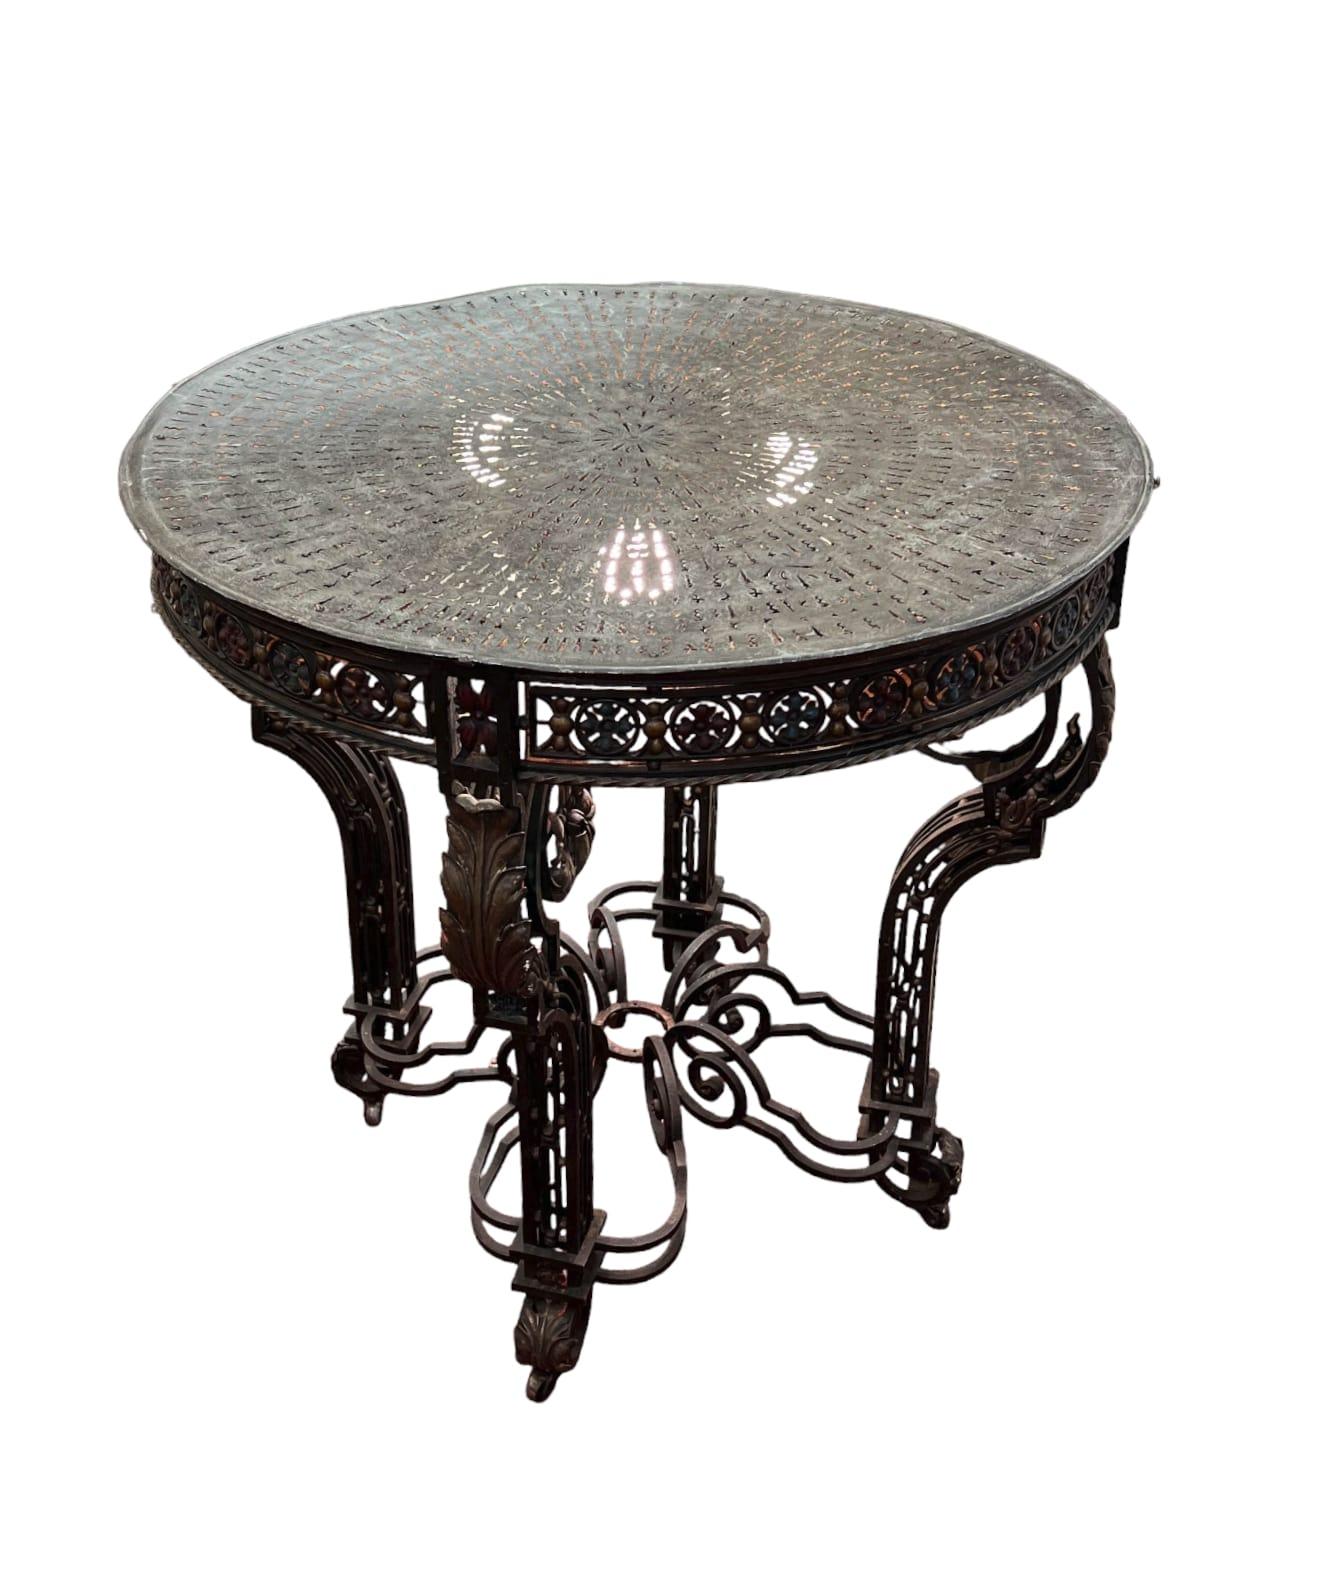 19th Century Wrought Iron 32 Inch Round Table With Built-In Light For Sale 1